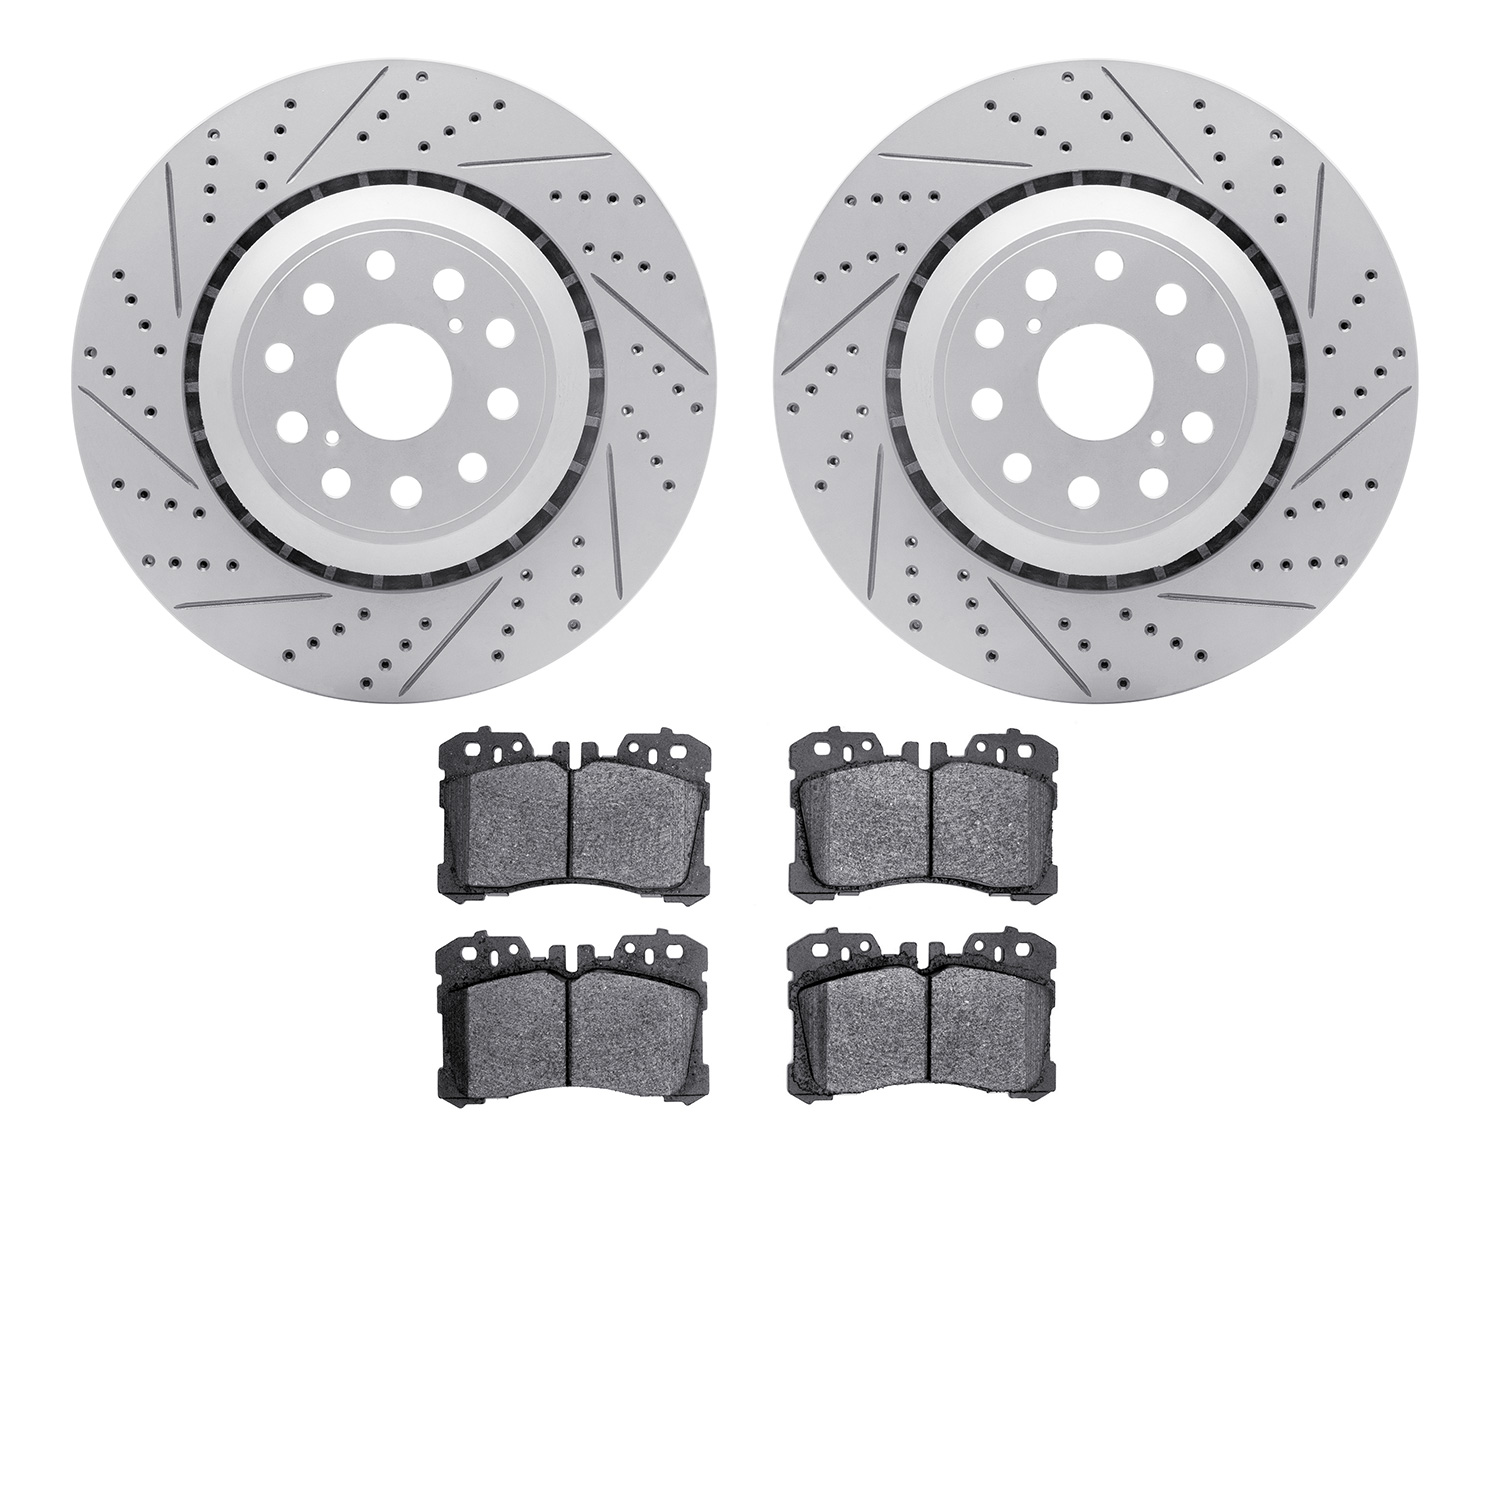 2502-75034 Geoperformance Drilled/Slotted Rotors w/5000 Advanced Brake Pads Kit, Fits Select Lexus/Toyota/Scion, Position: Front